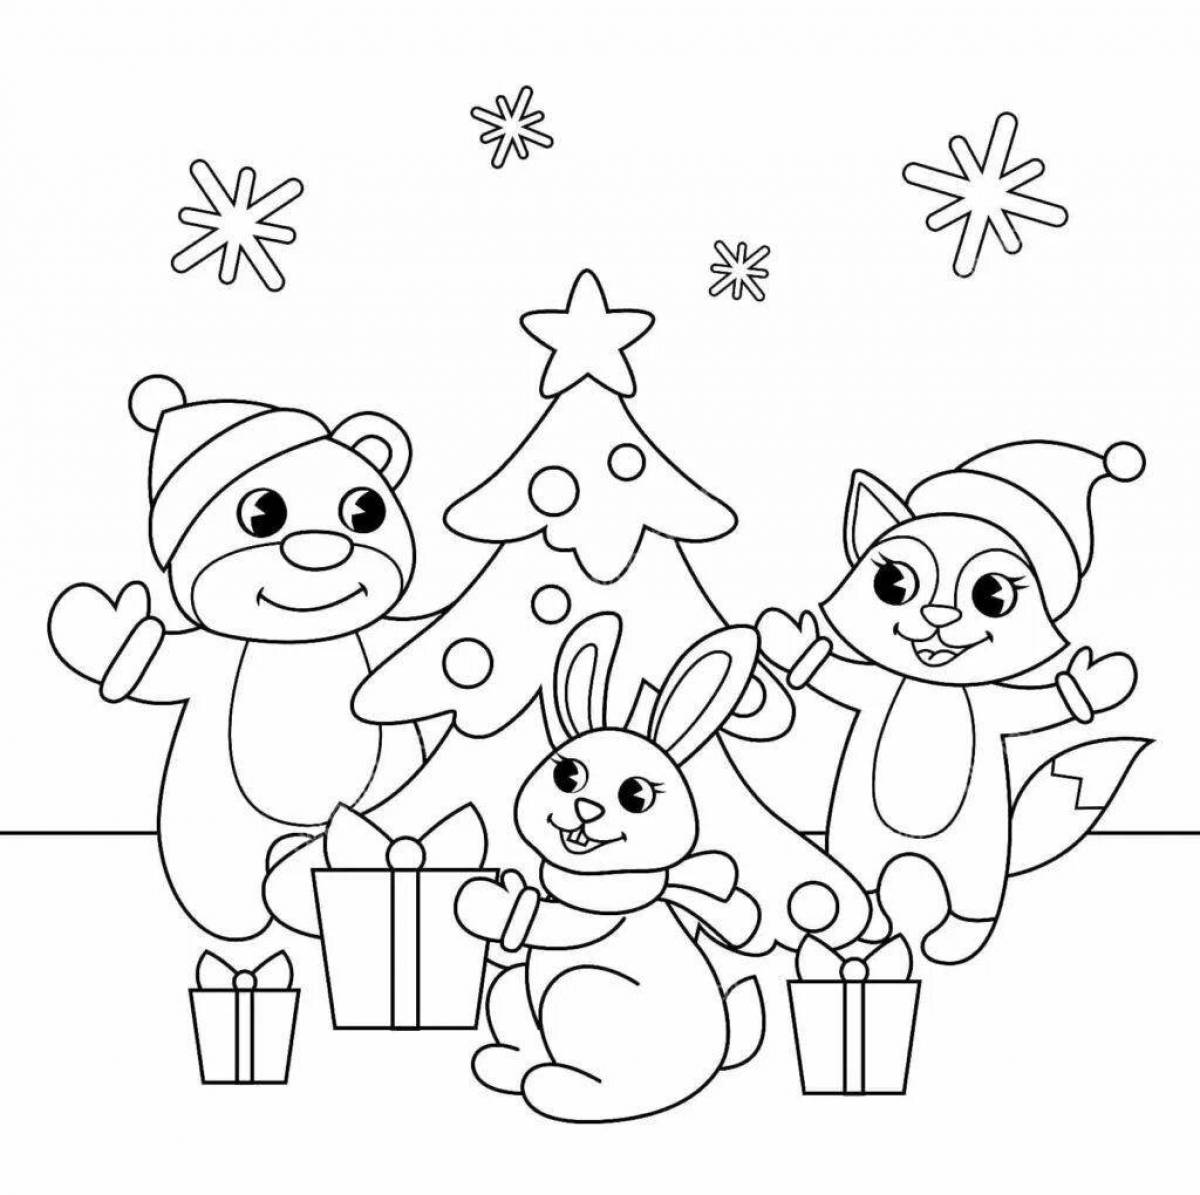 Fox Festive Christmas Coloring Page